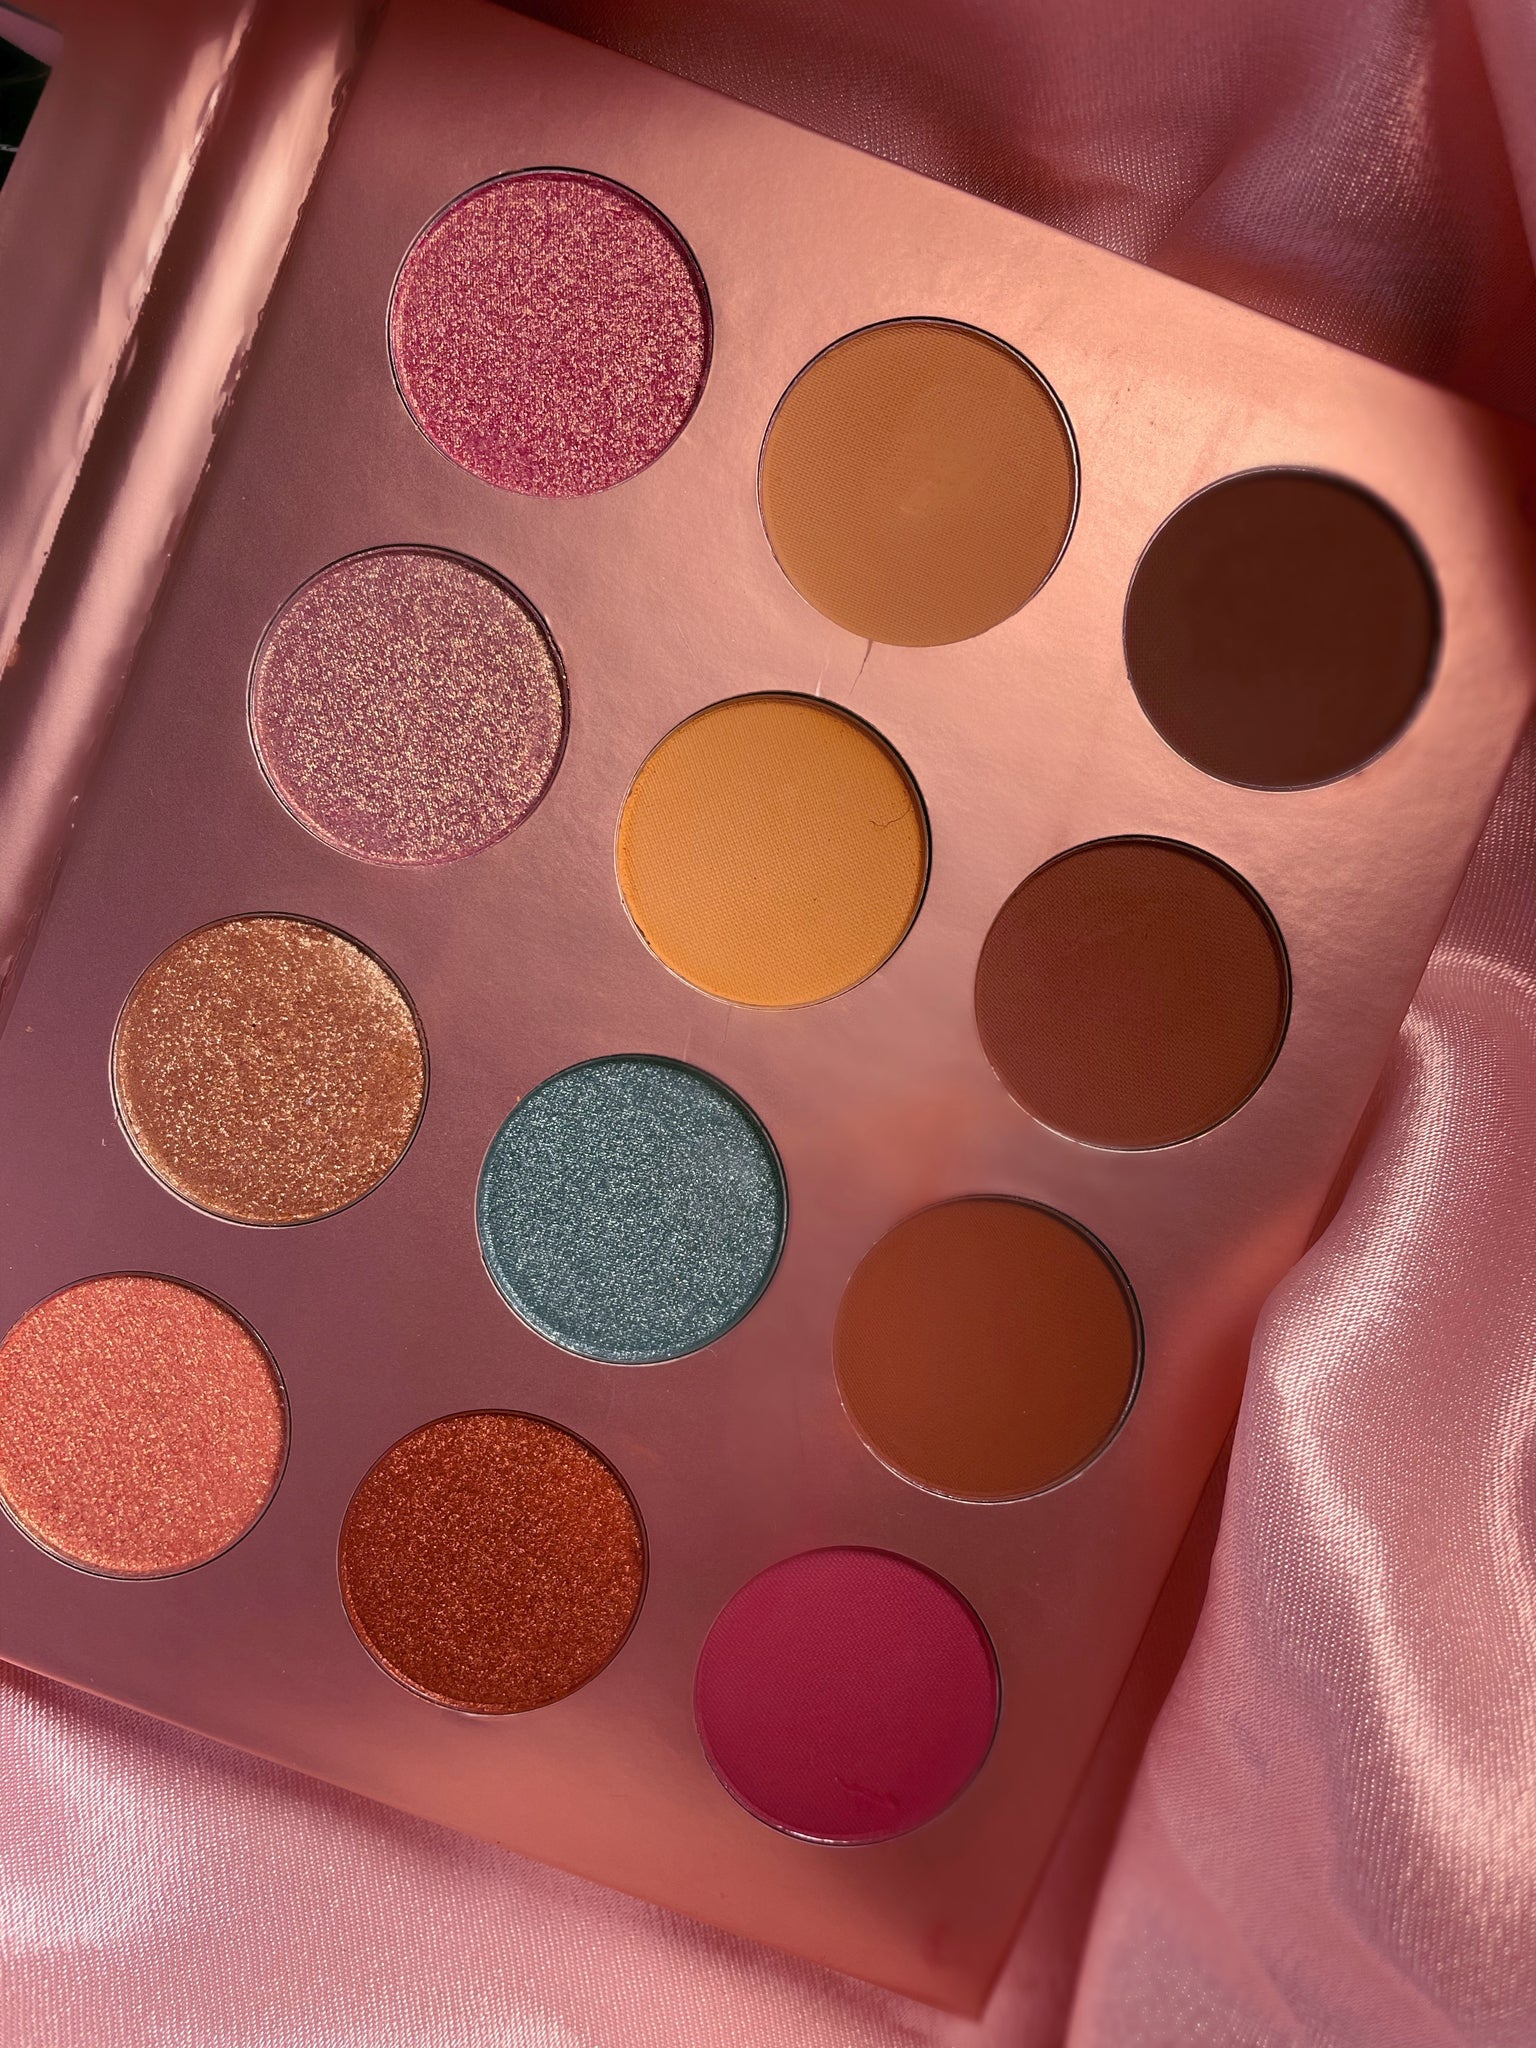 Be Bold, Be You, Be Proud Eyeshadow Palette - Jos Cosmetics London